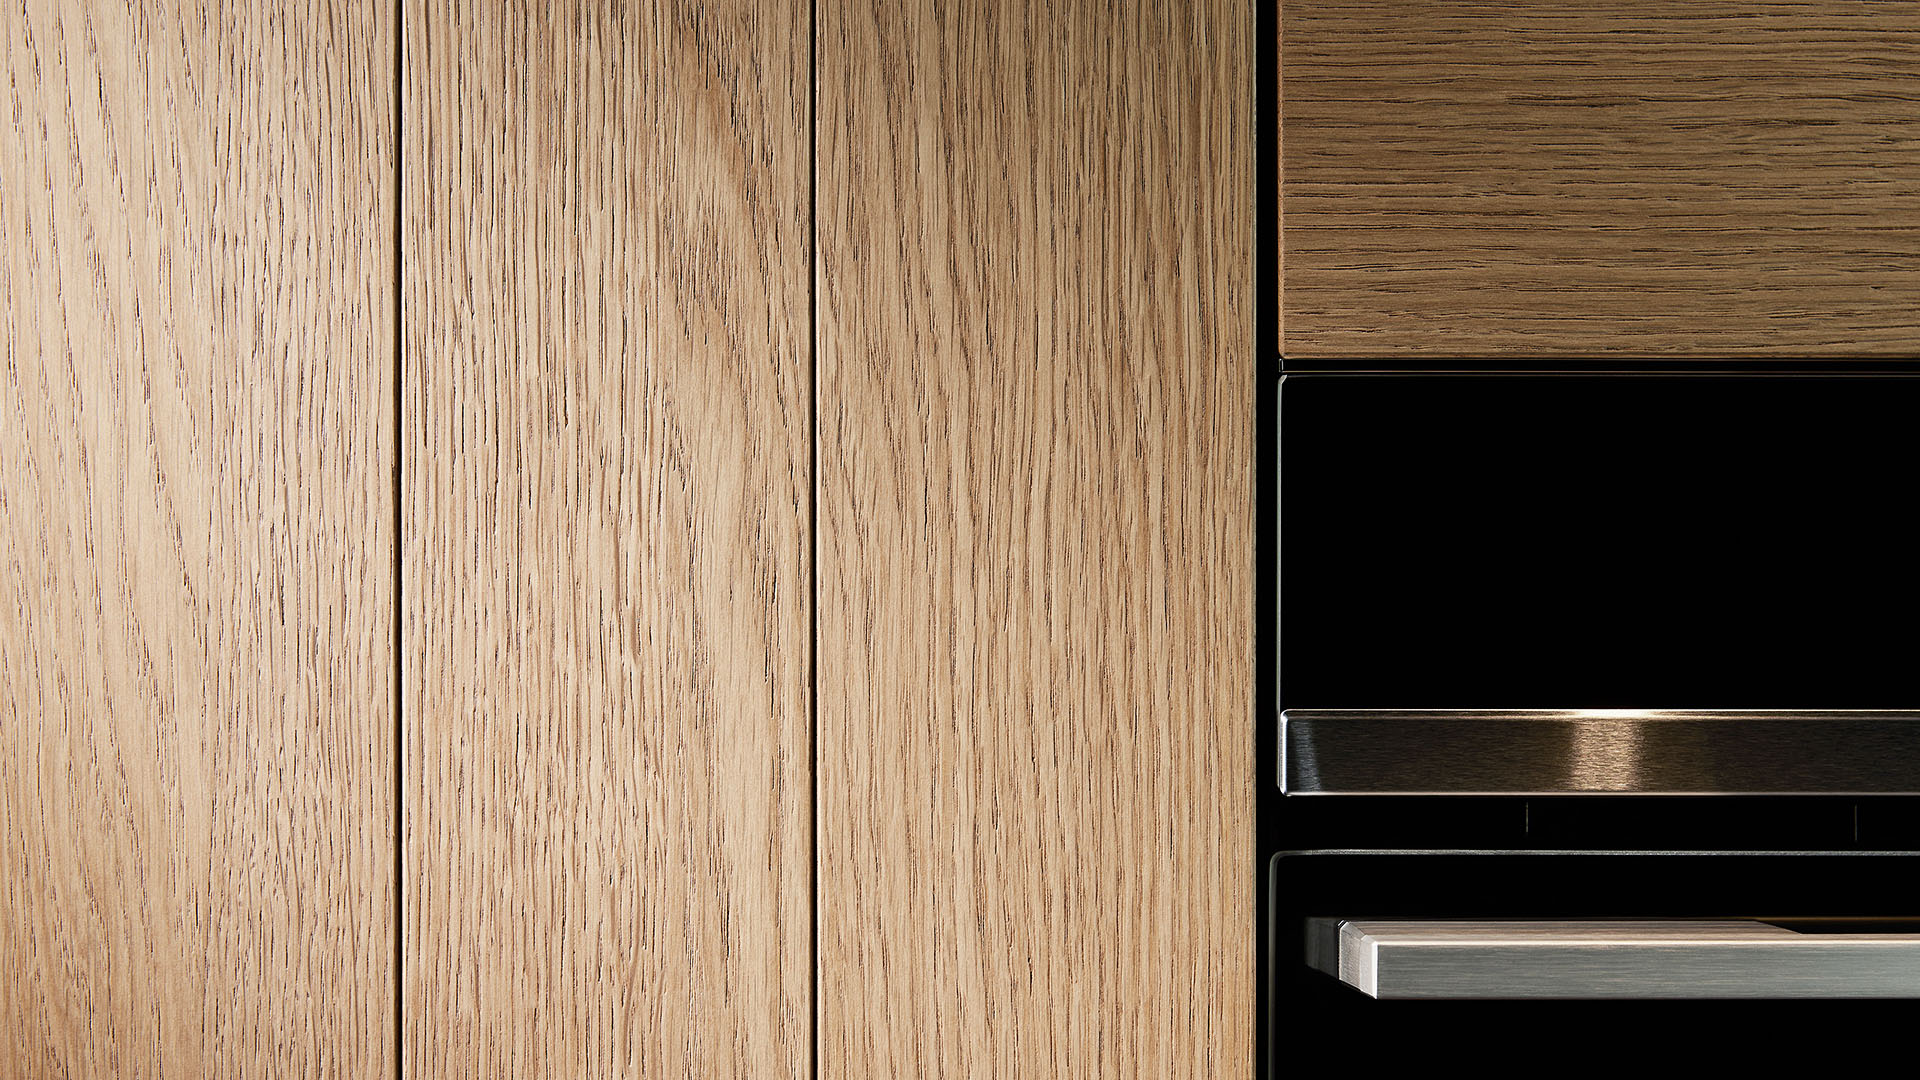 Shot of the kitchen's wood detail, alongside the Minimal Oven